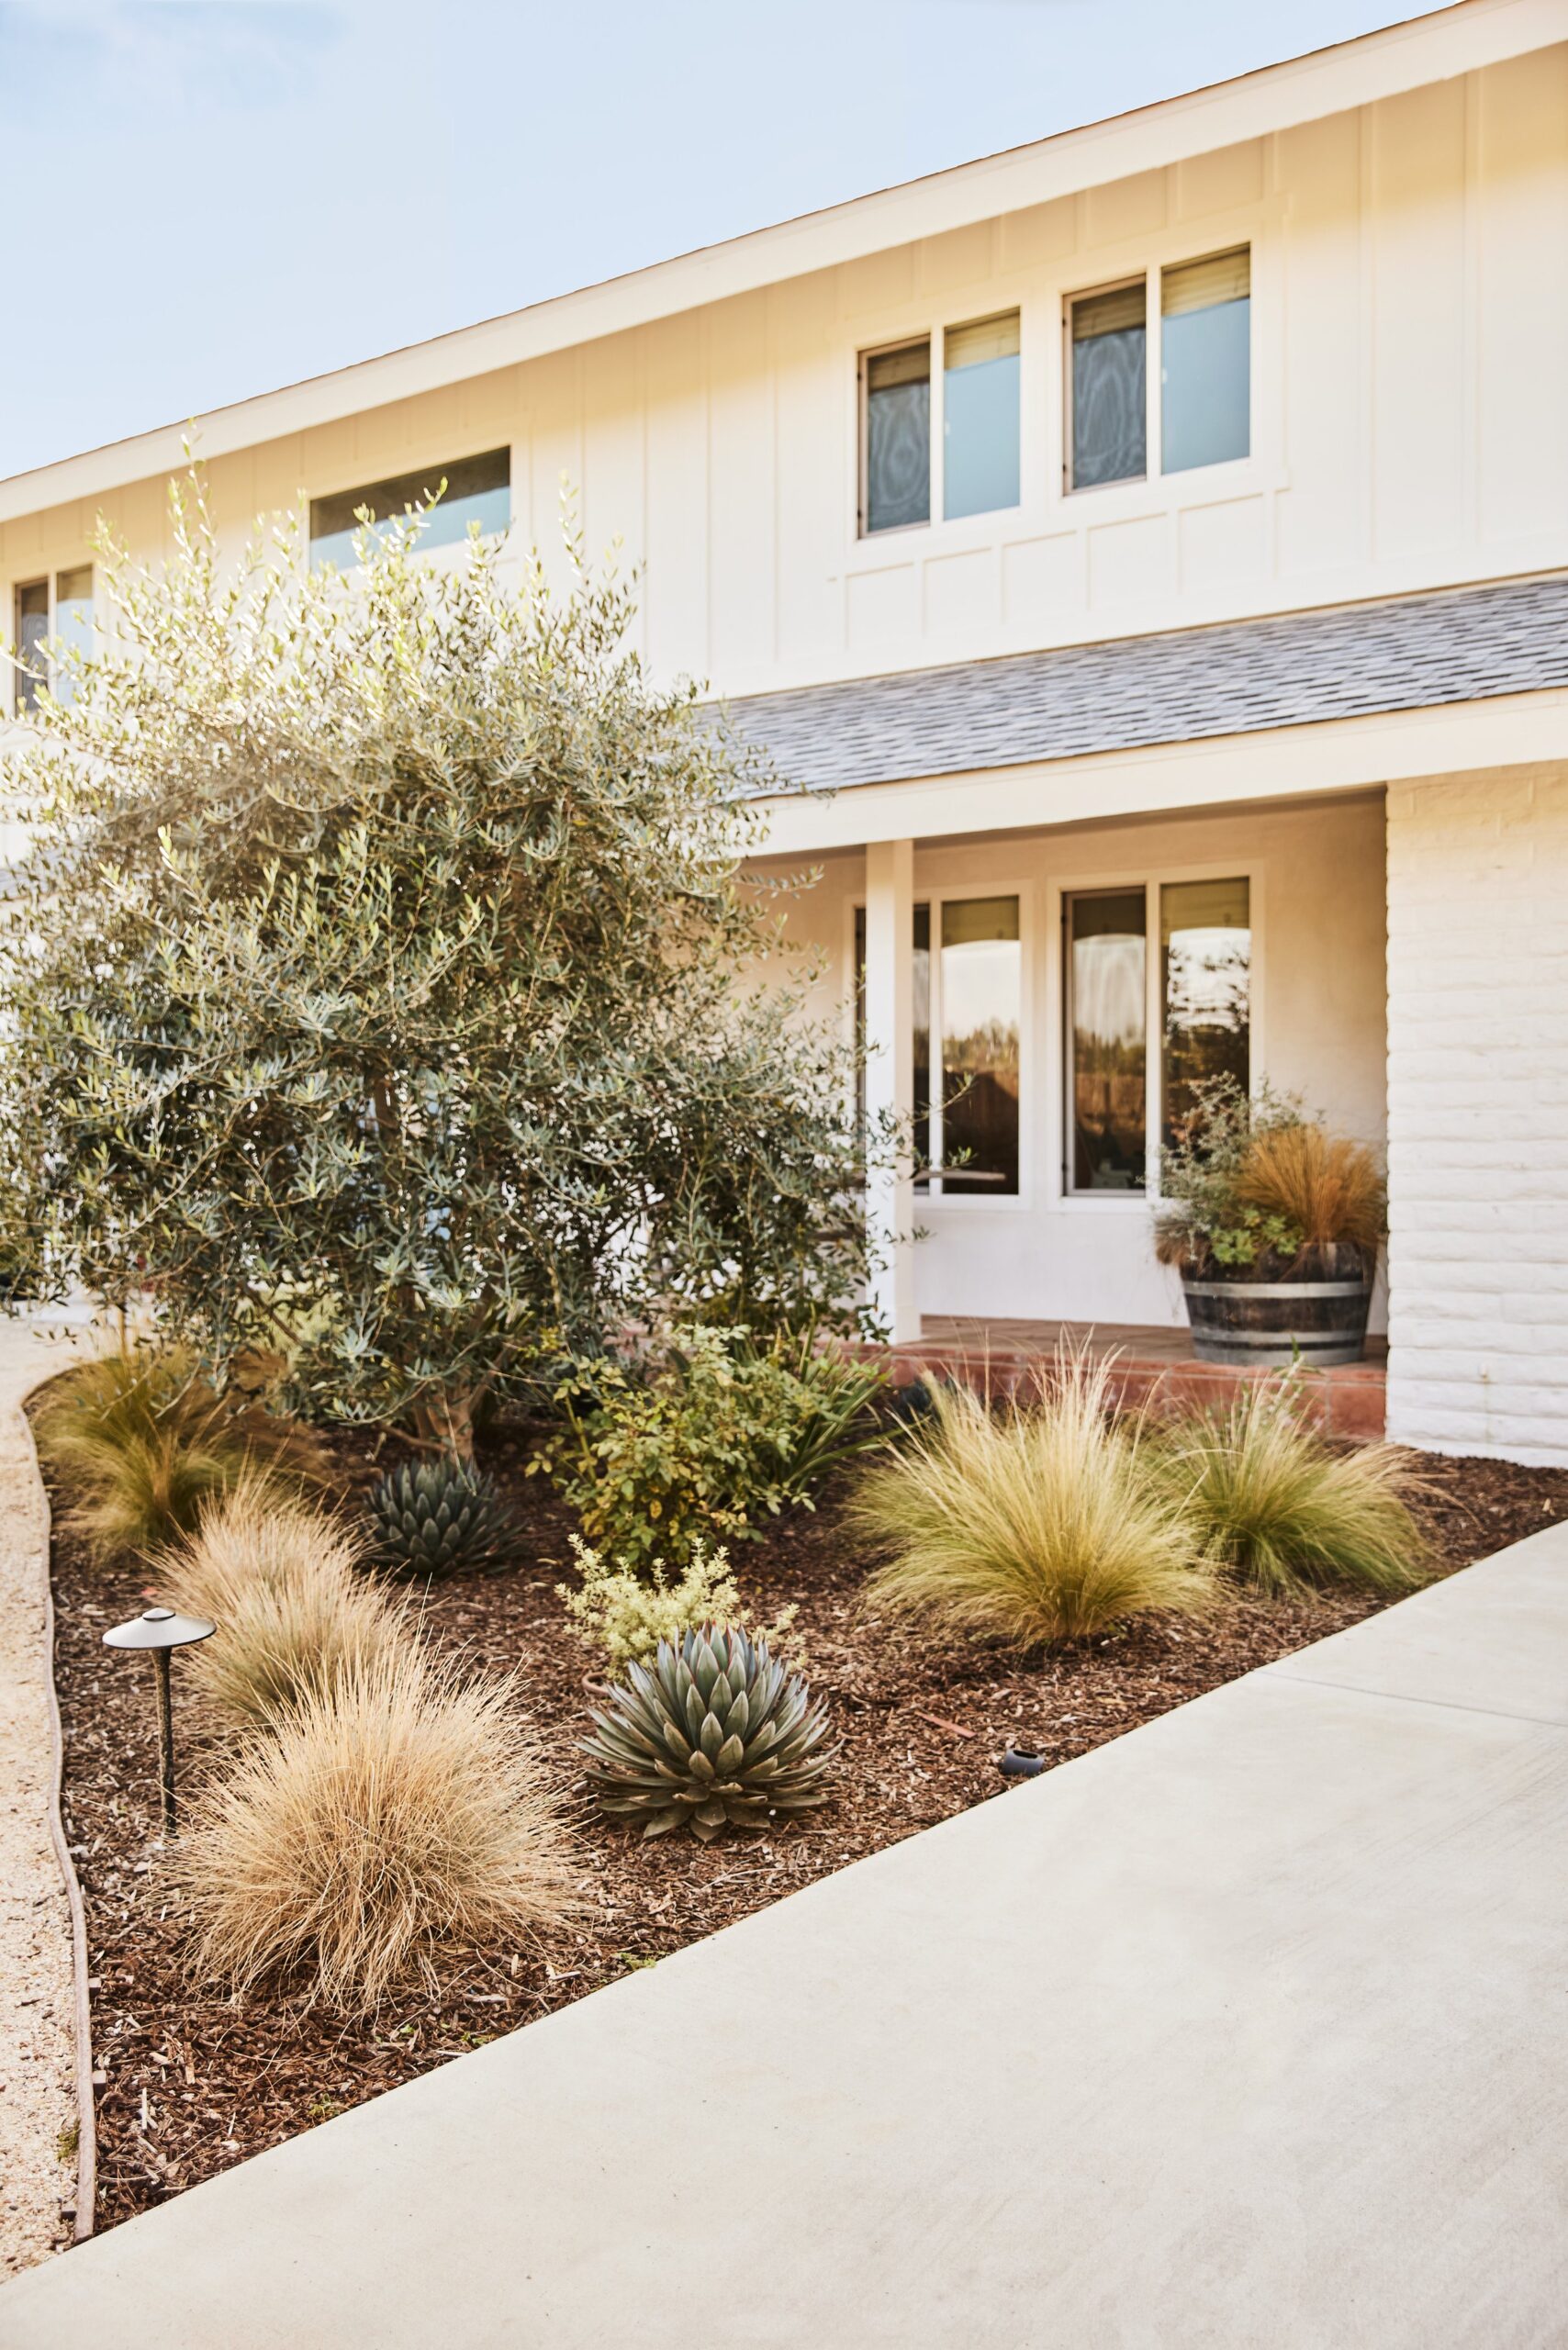 drought tolerant front yard with ornamental grasses instead of lawn